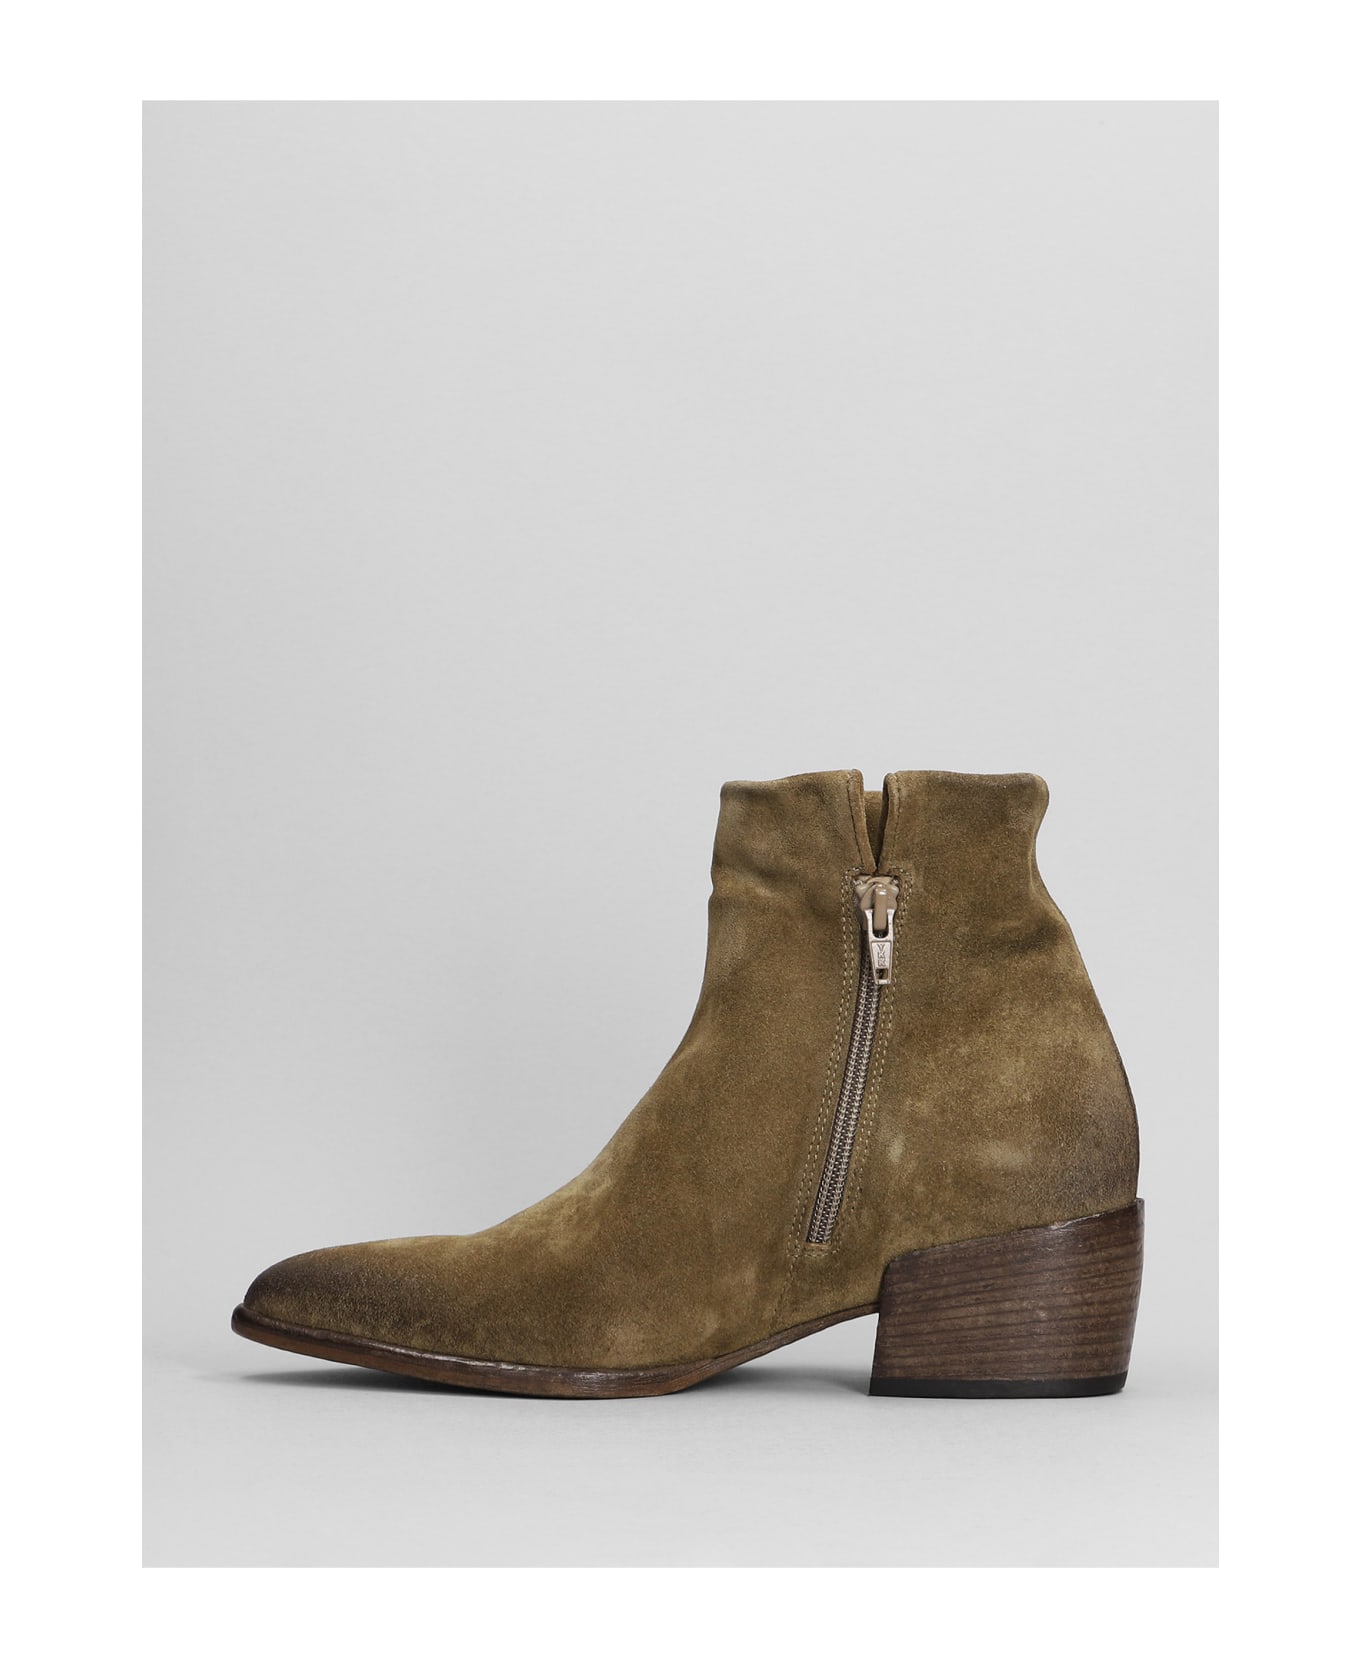 Elena Iachi Texan Ankle Boots In Taupe Suede - taupe ブーツ